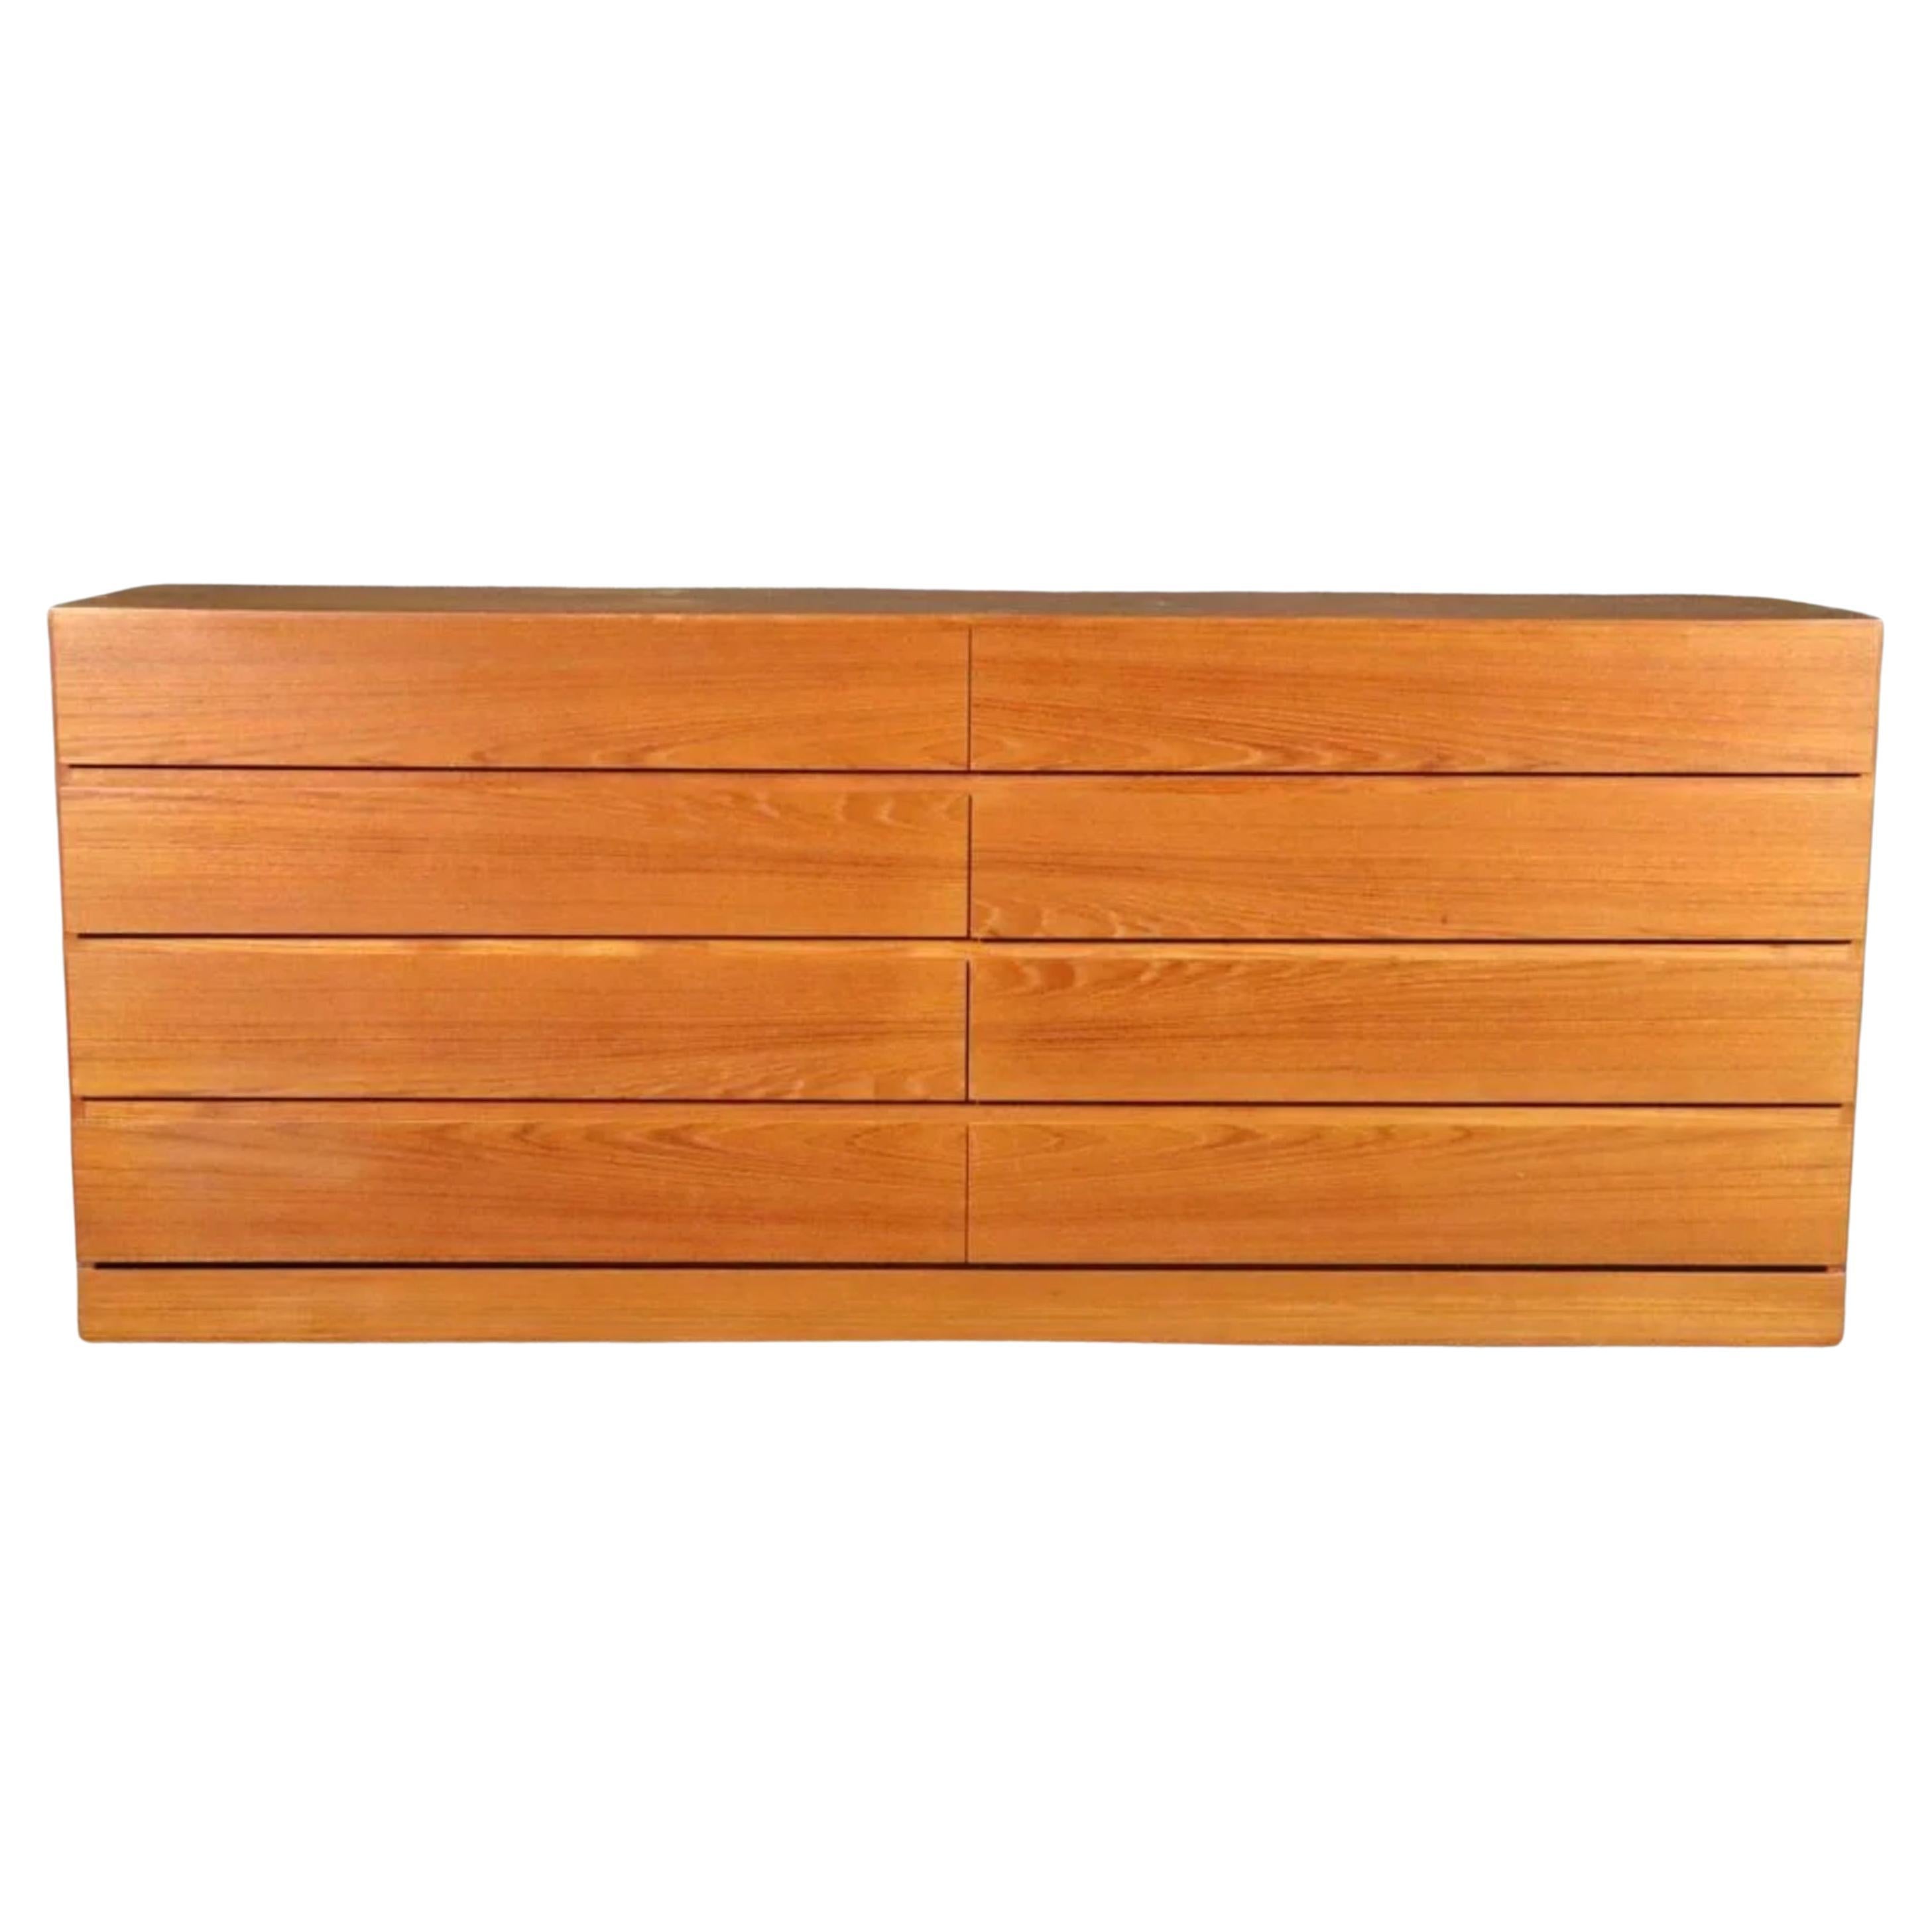 Midcentury Danish Modern 8 drawer teak dresser or credenza by Arne Wahl Iversen. Beautiful light teak color with a nice grain. All drawers clean inside and out as well as slide smooth. Simple symmetric design - good lines. Shows very little use.